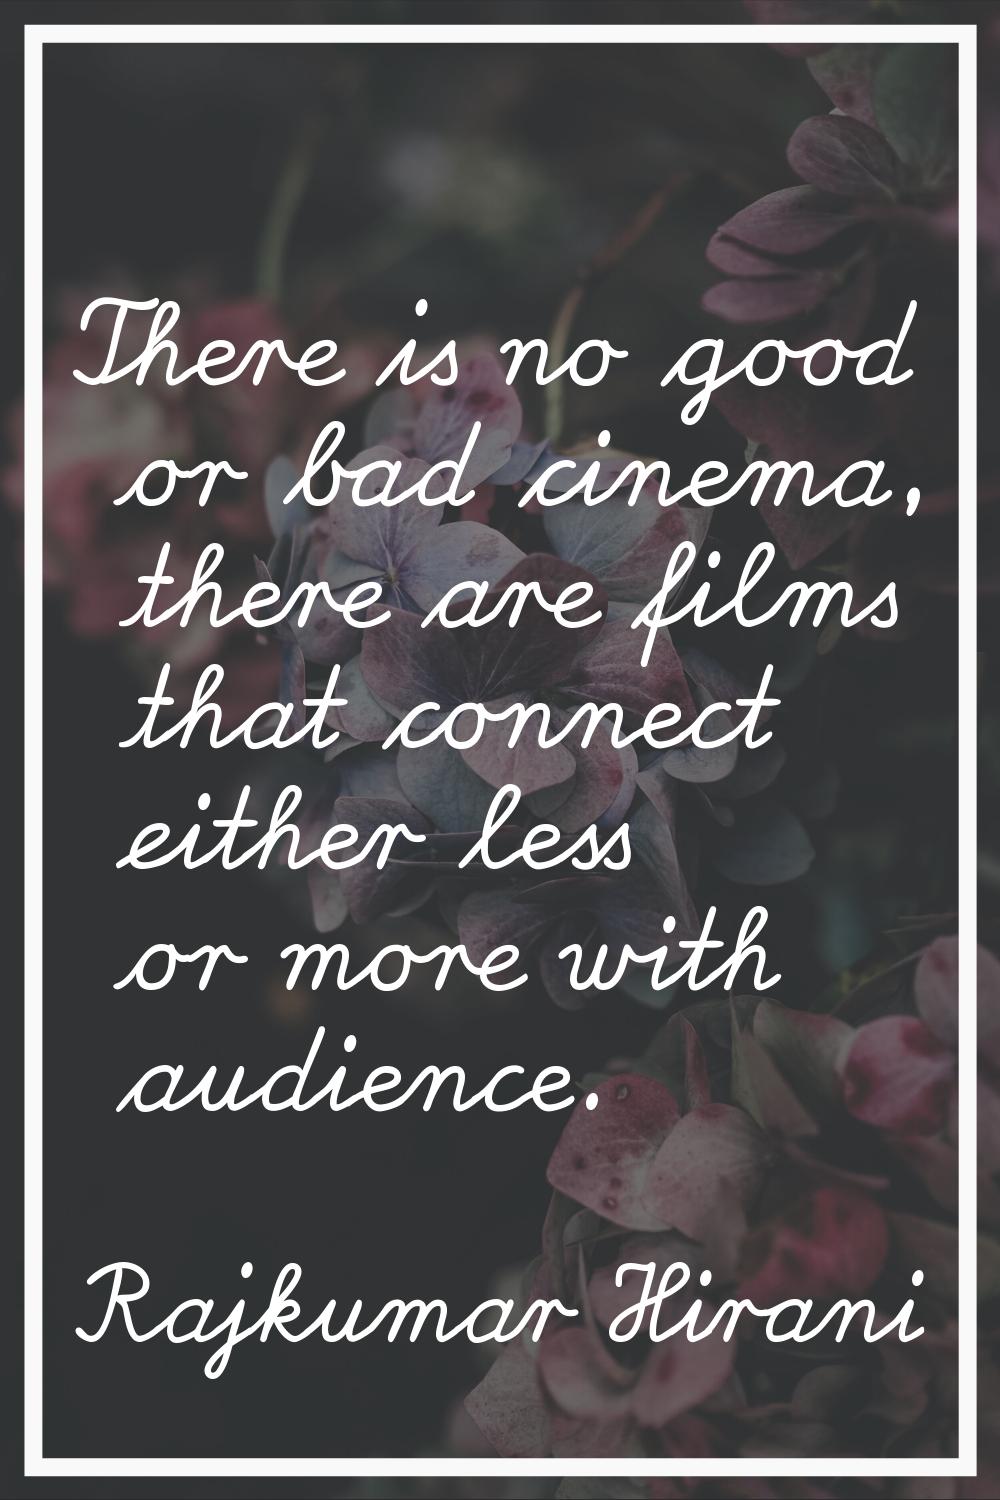 There is no good or bad cinema, there are films that connect either less or more with audience.